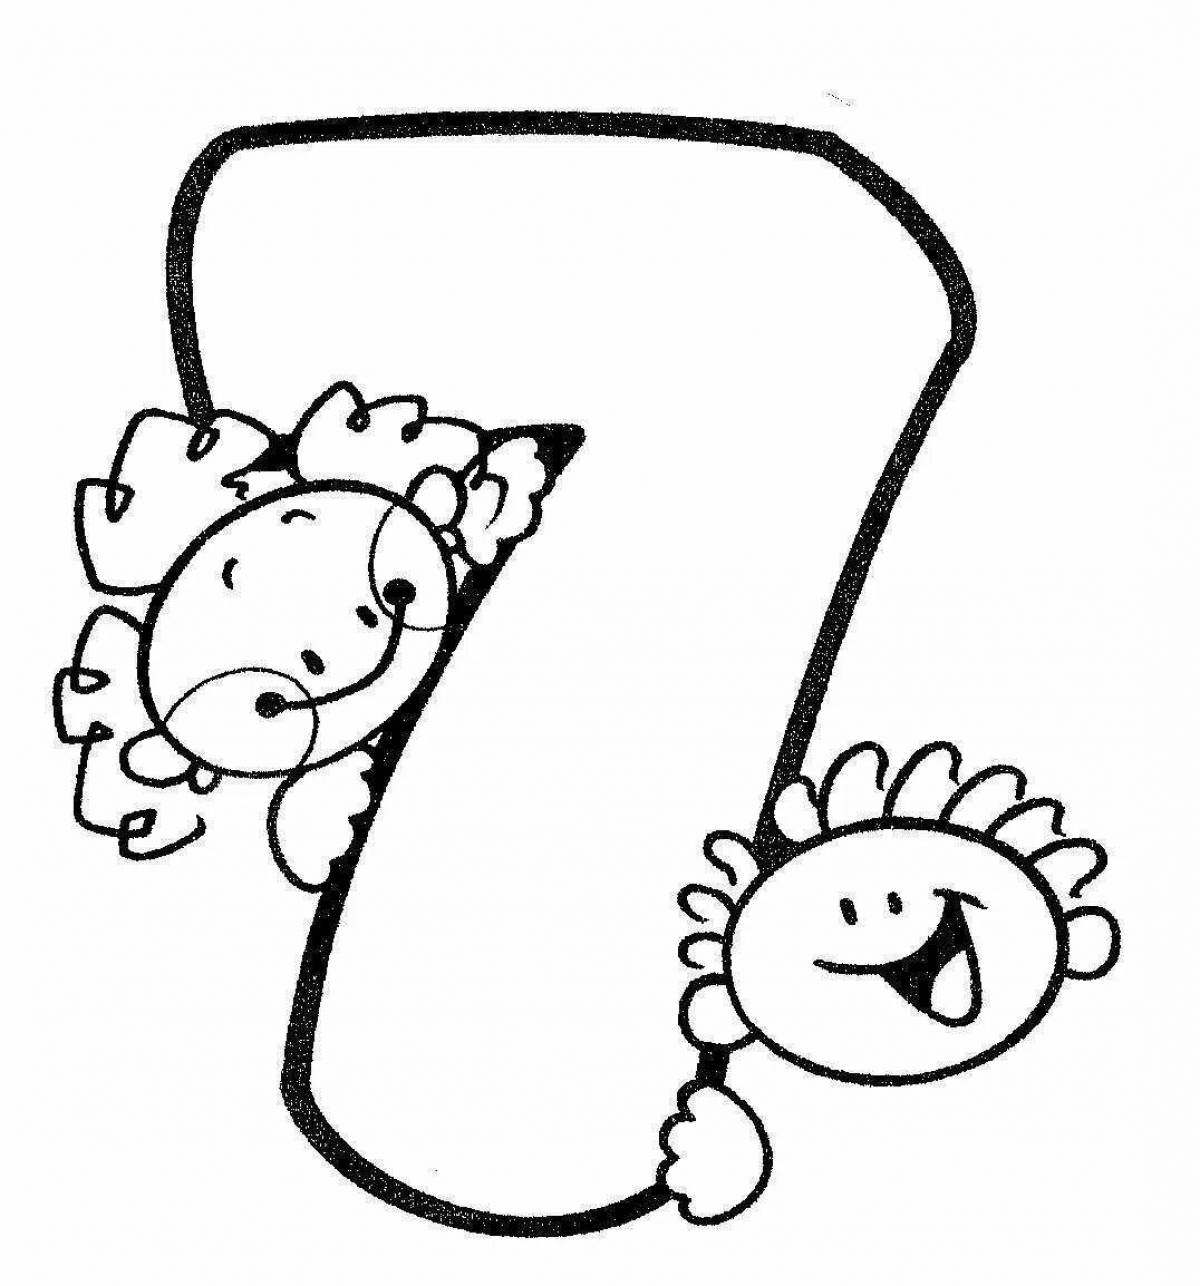 Color-frenzy funny numbers coloring page